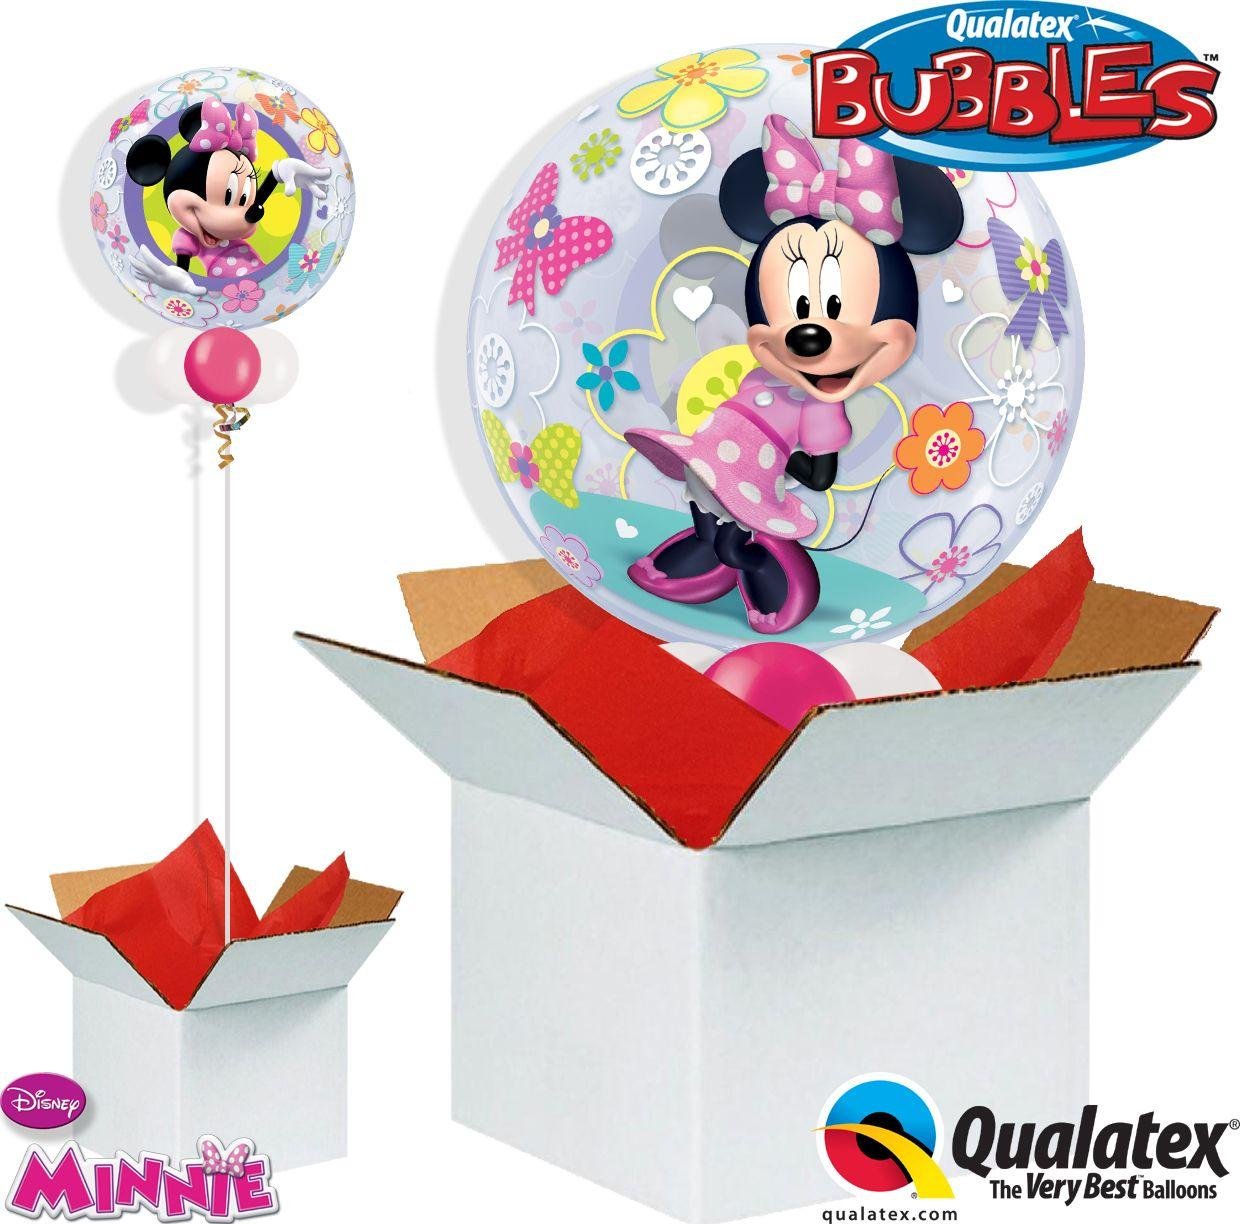 Disney Minnie Mouse Bow-Tique Bubble Balloon in a Box